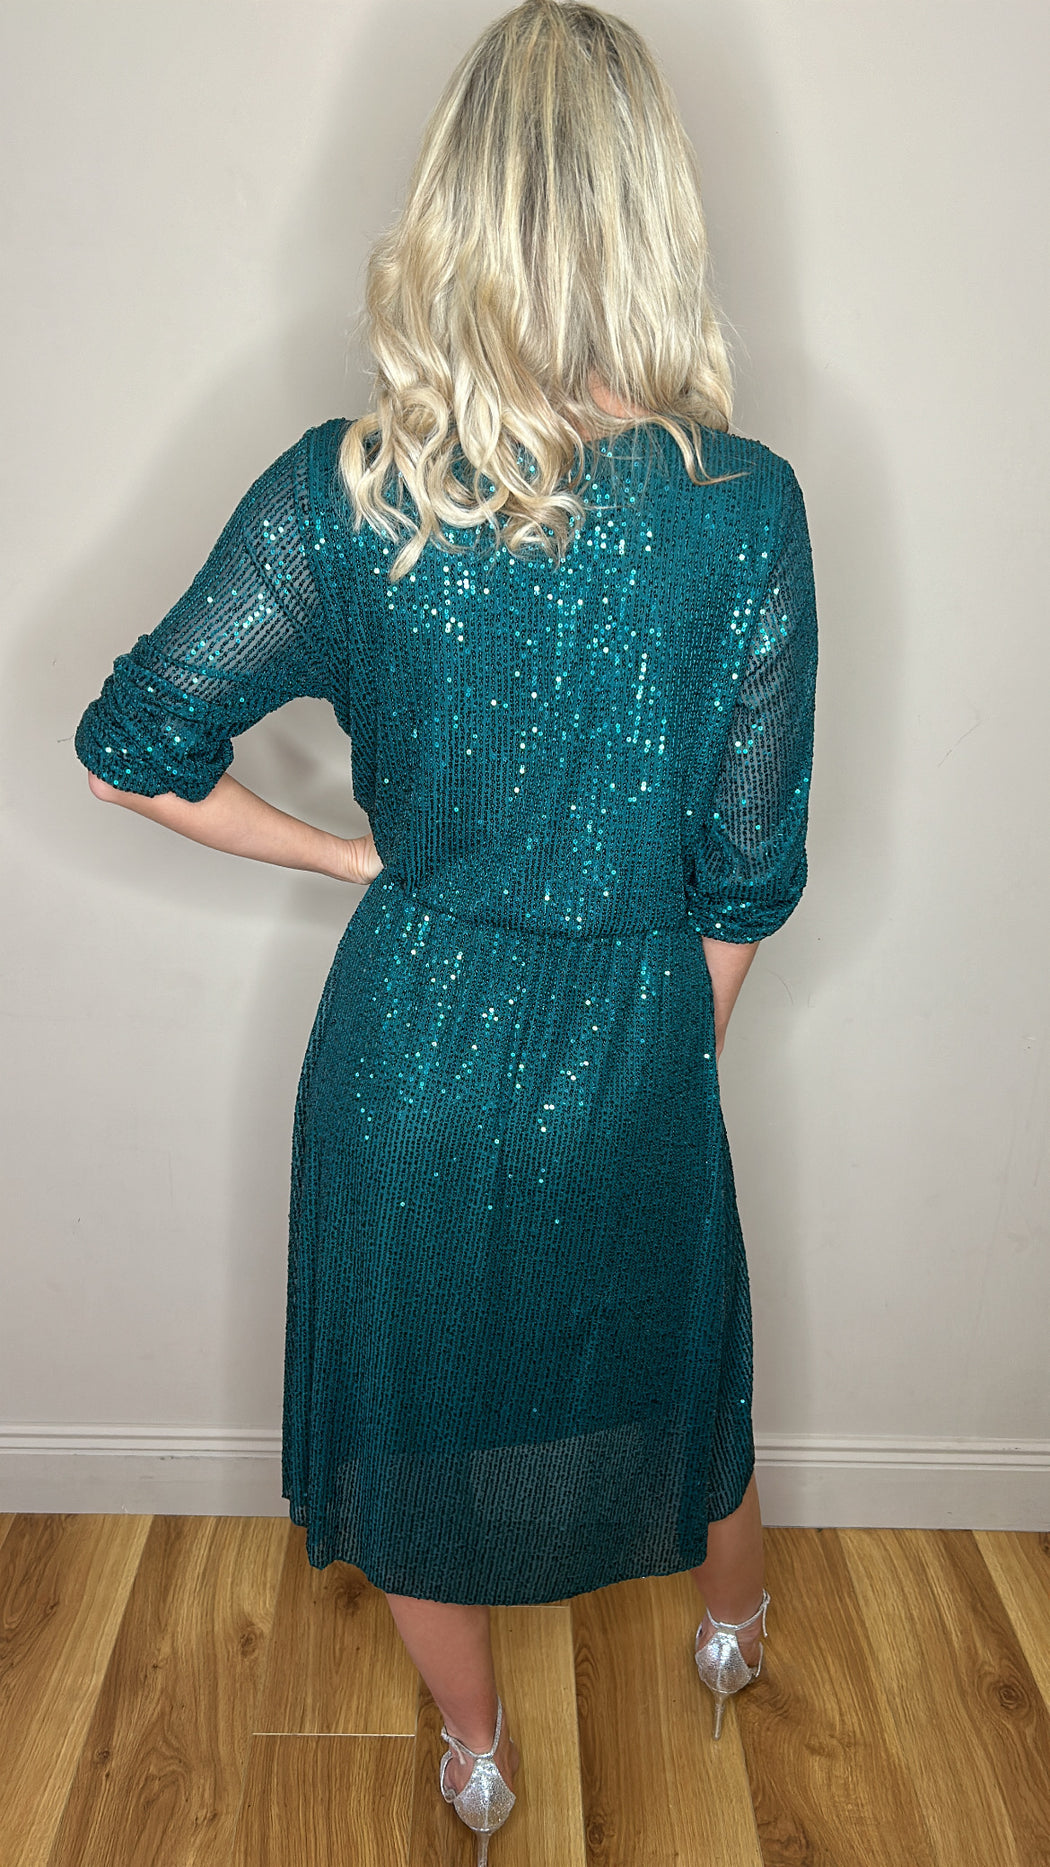 Teal green sequinned midi